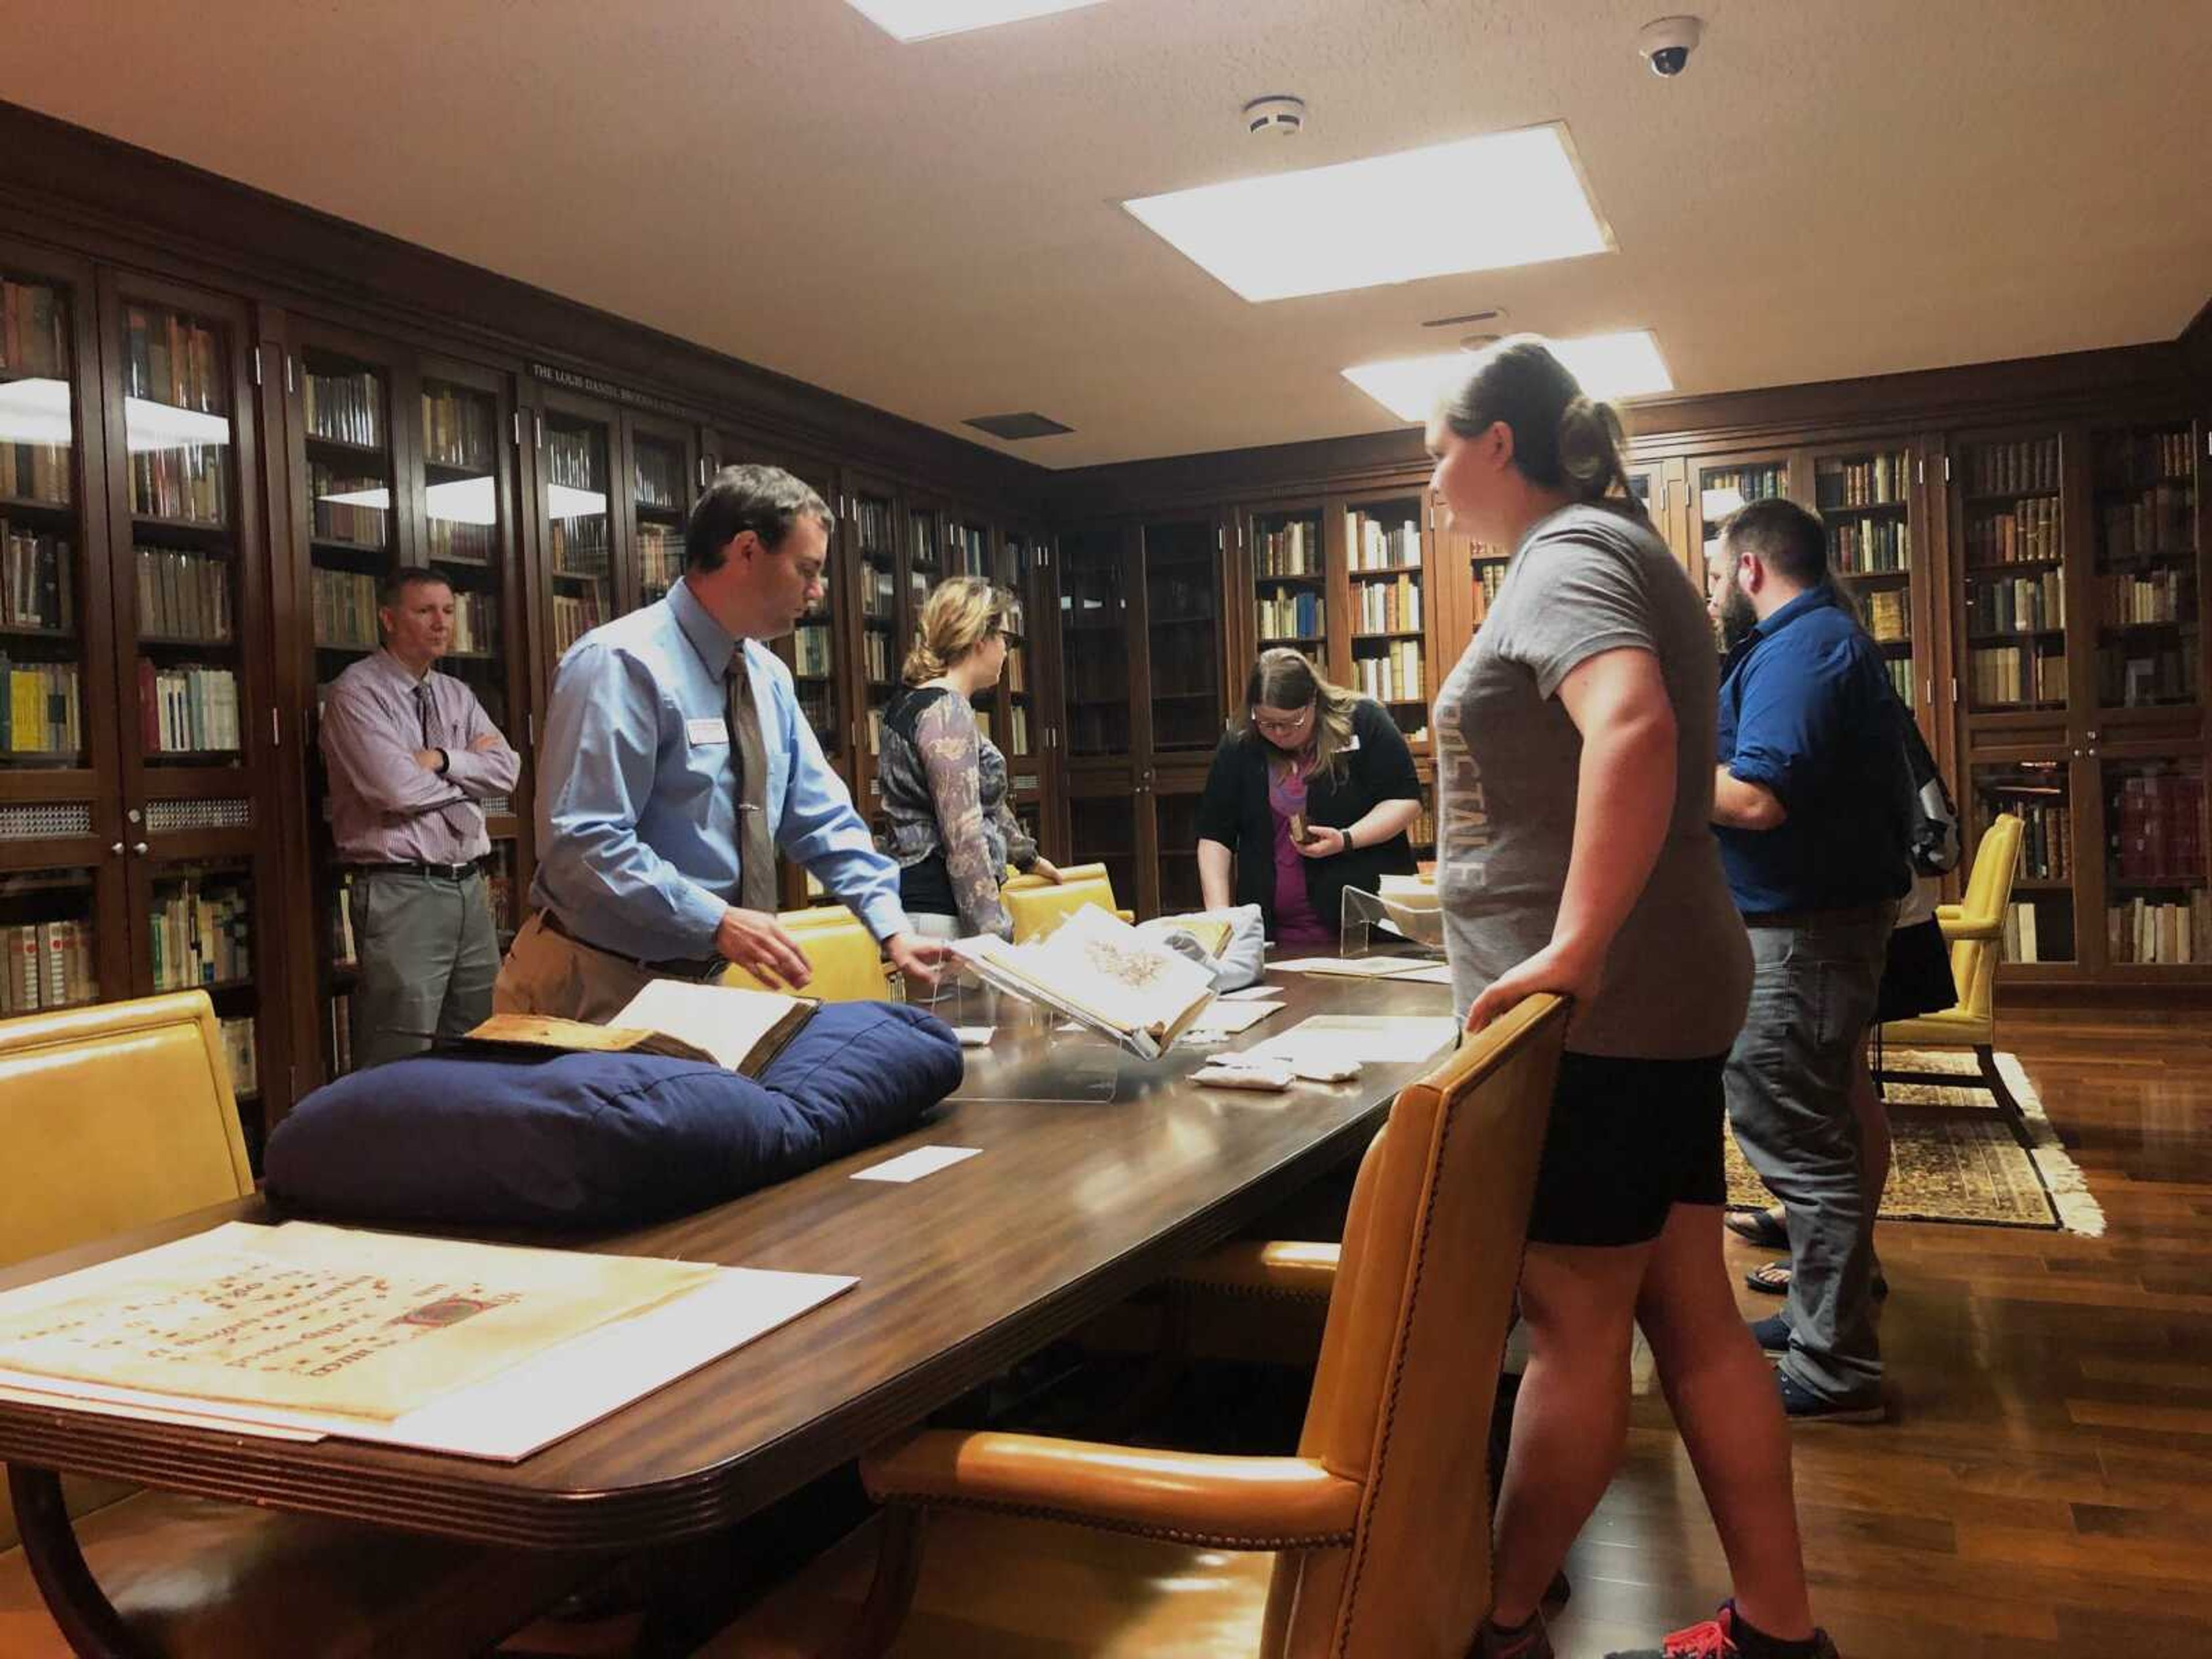 The Rare Book Room inside Kent Library opened its doors for a special open house Oct. 2 - 3. The room has two large collections, the William Faulkner and Charles Harrison collections, and holds over 10,000 pieces.